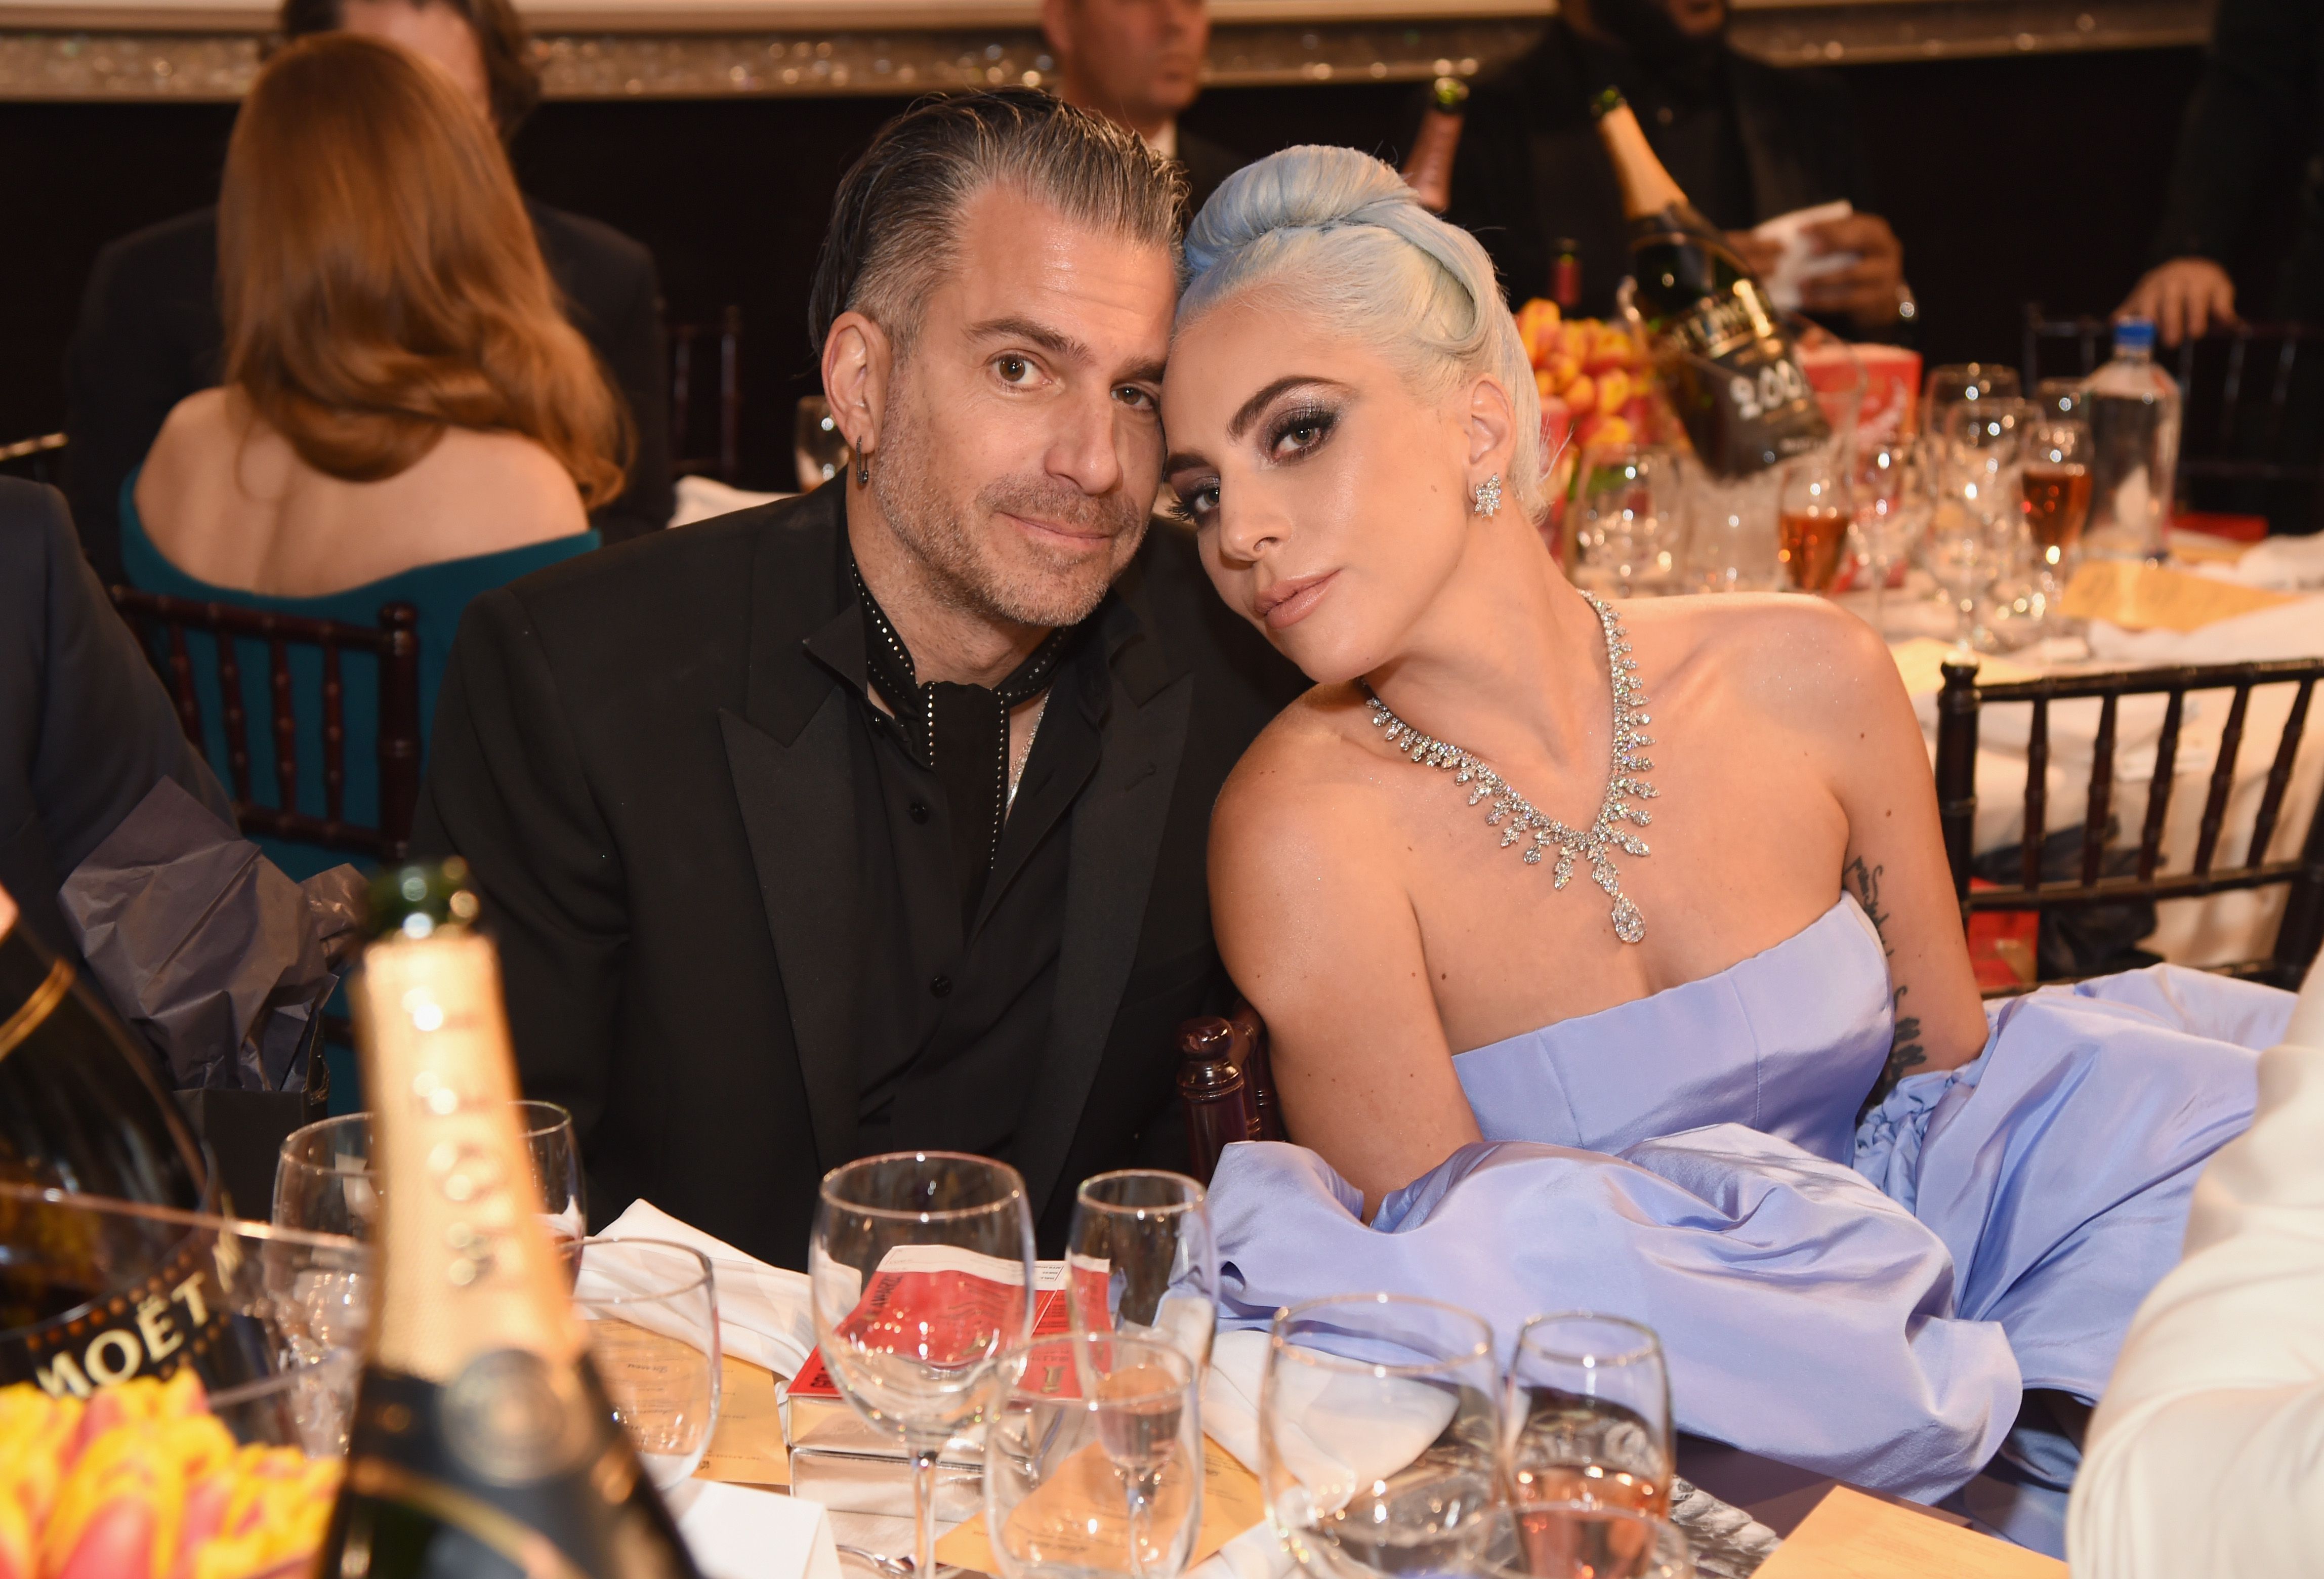 christian-carino-and-lady-gaga-attend-moet-chandon-at-the-news-photo-1078359578-1550609762